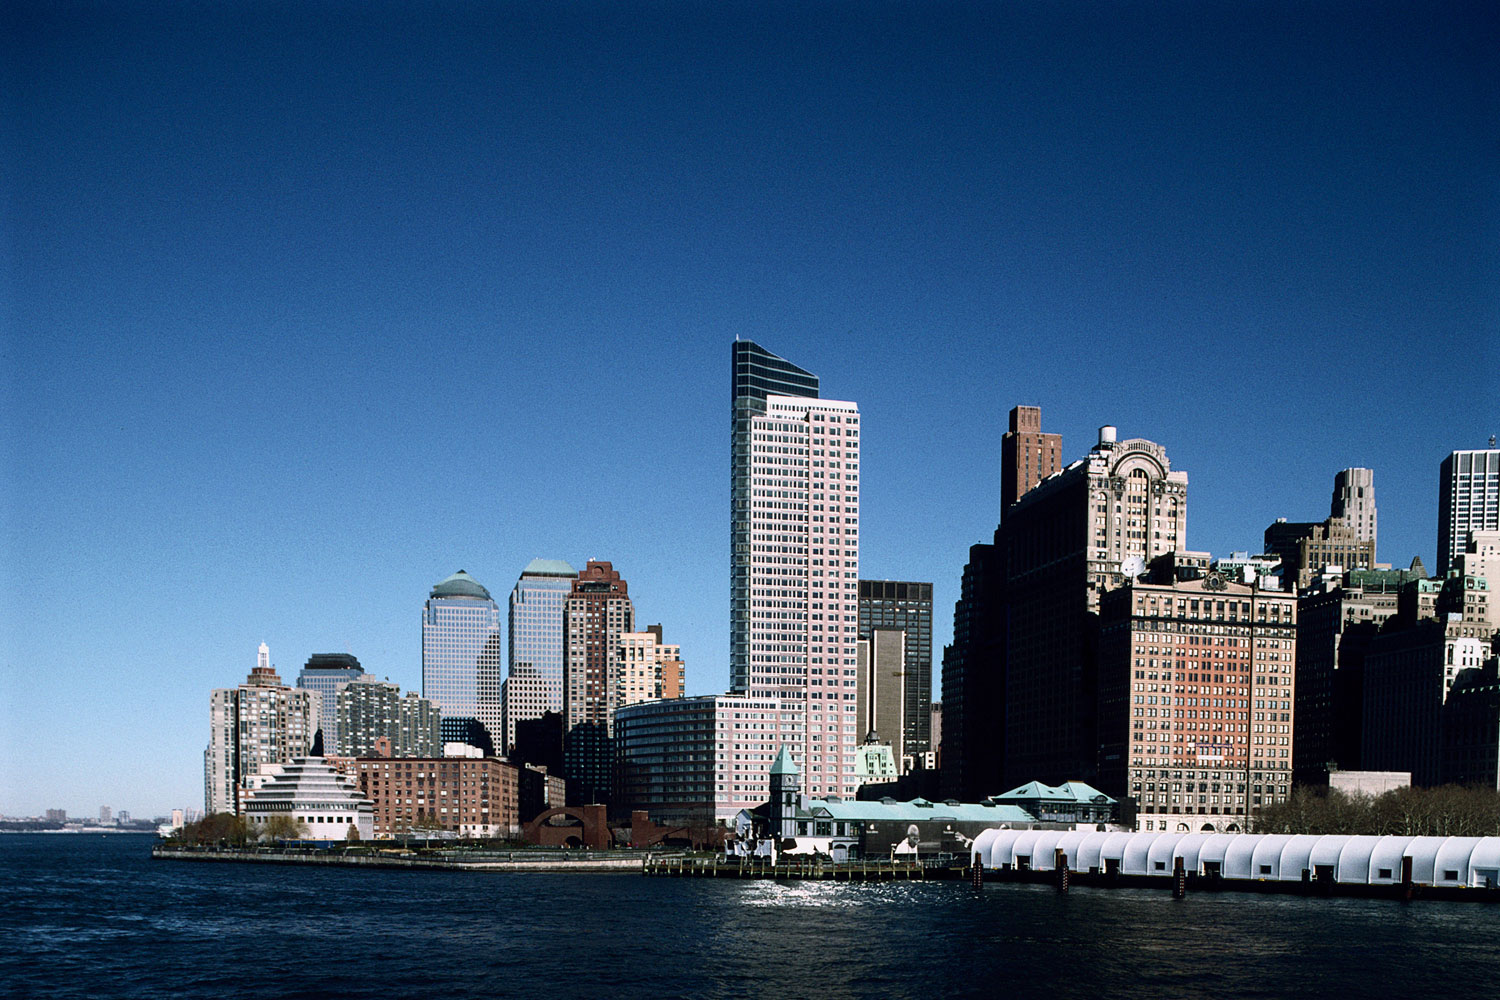 View from the Statue of Liberty Ferry, 2001.